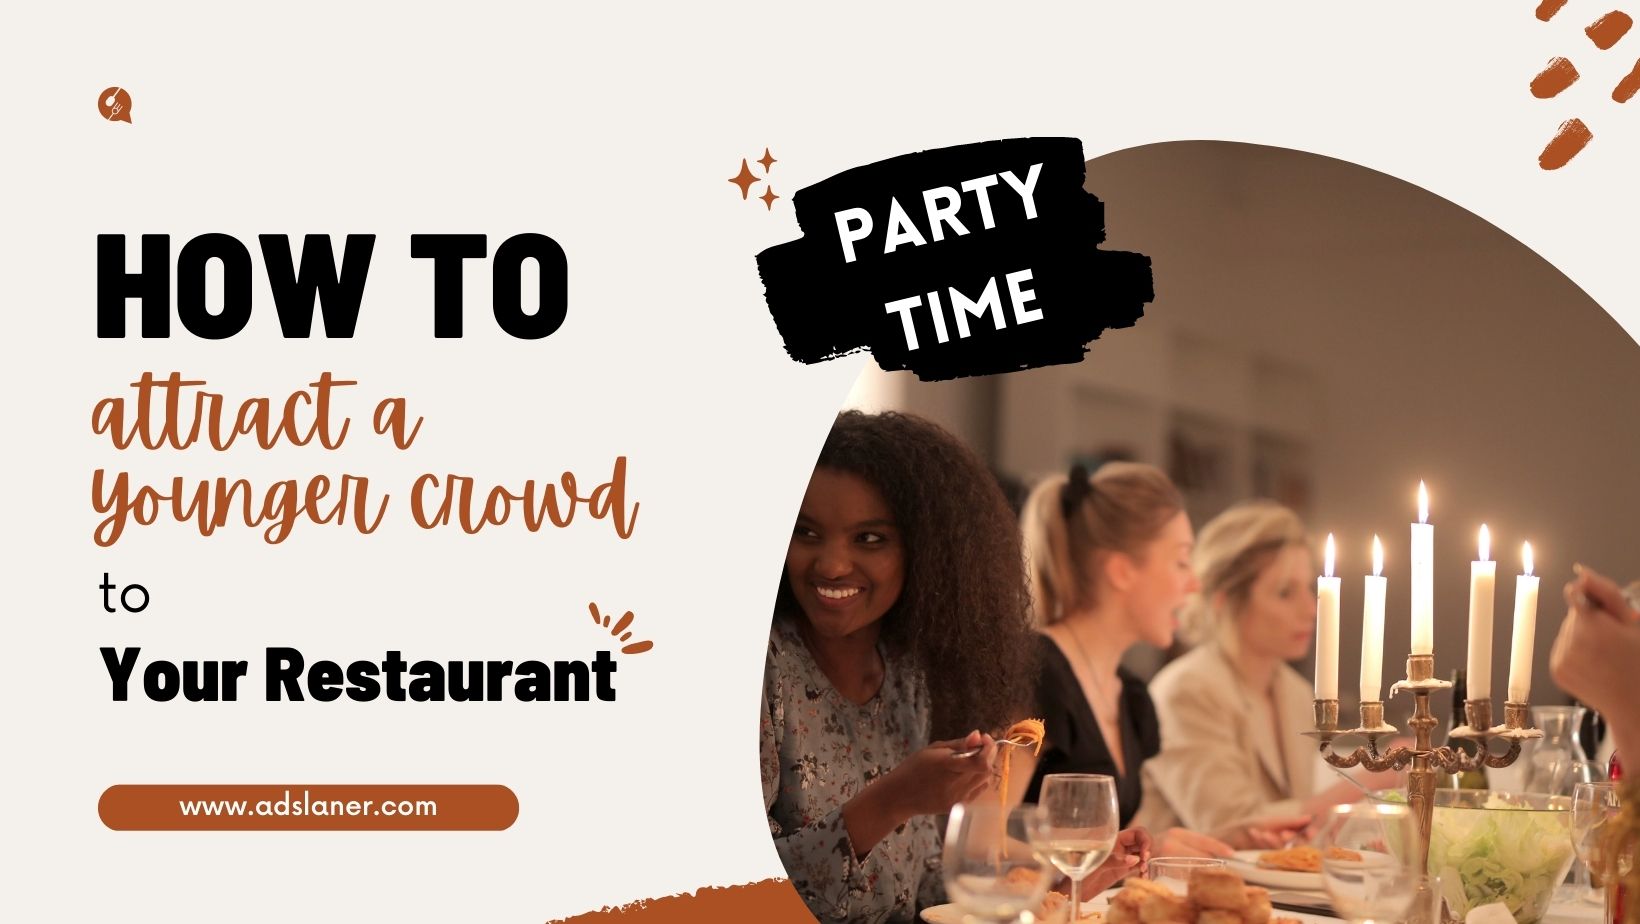 How to attract a younger crowd to your restaurant